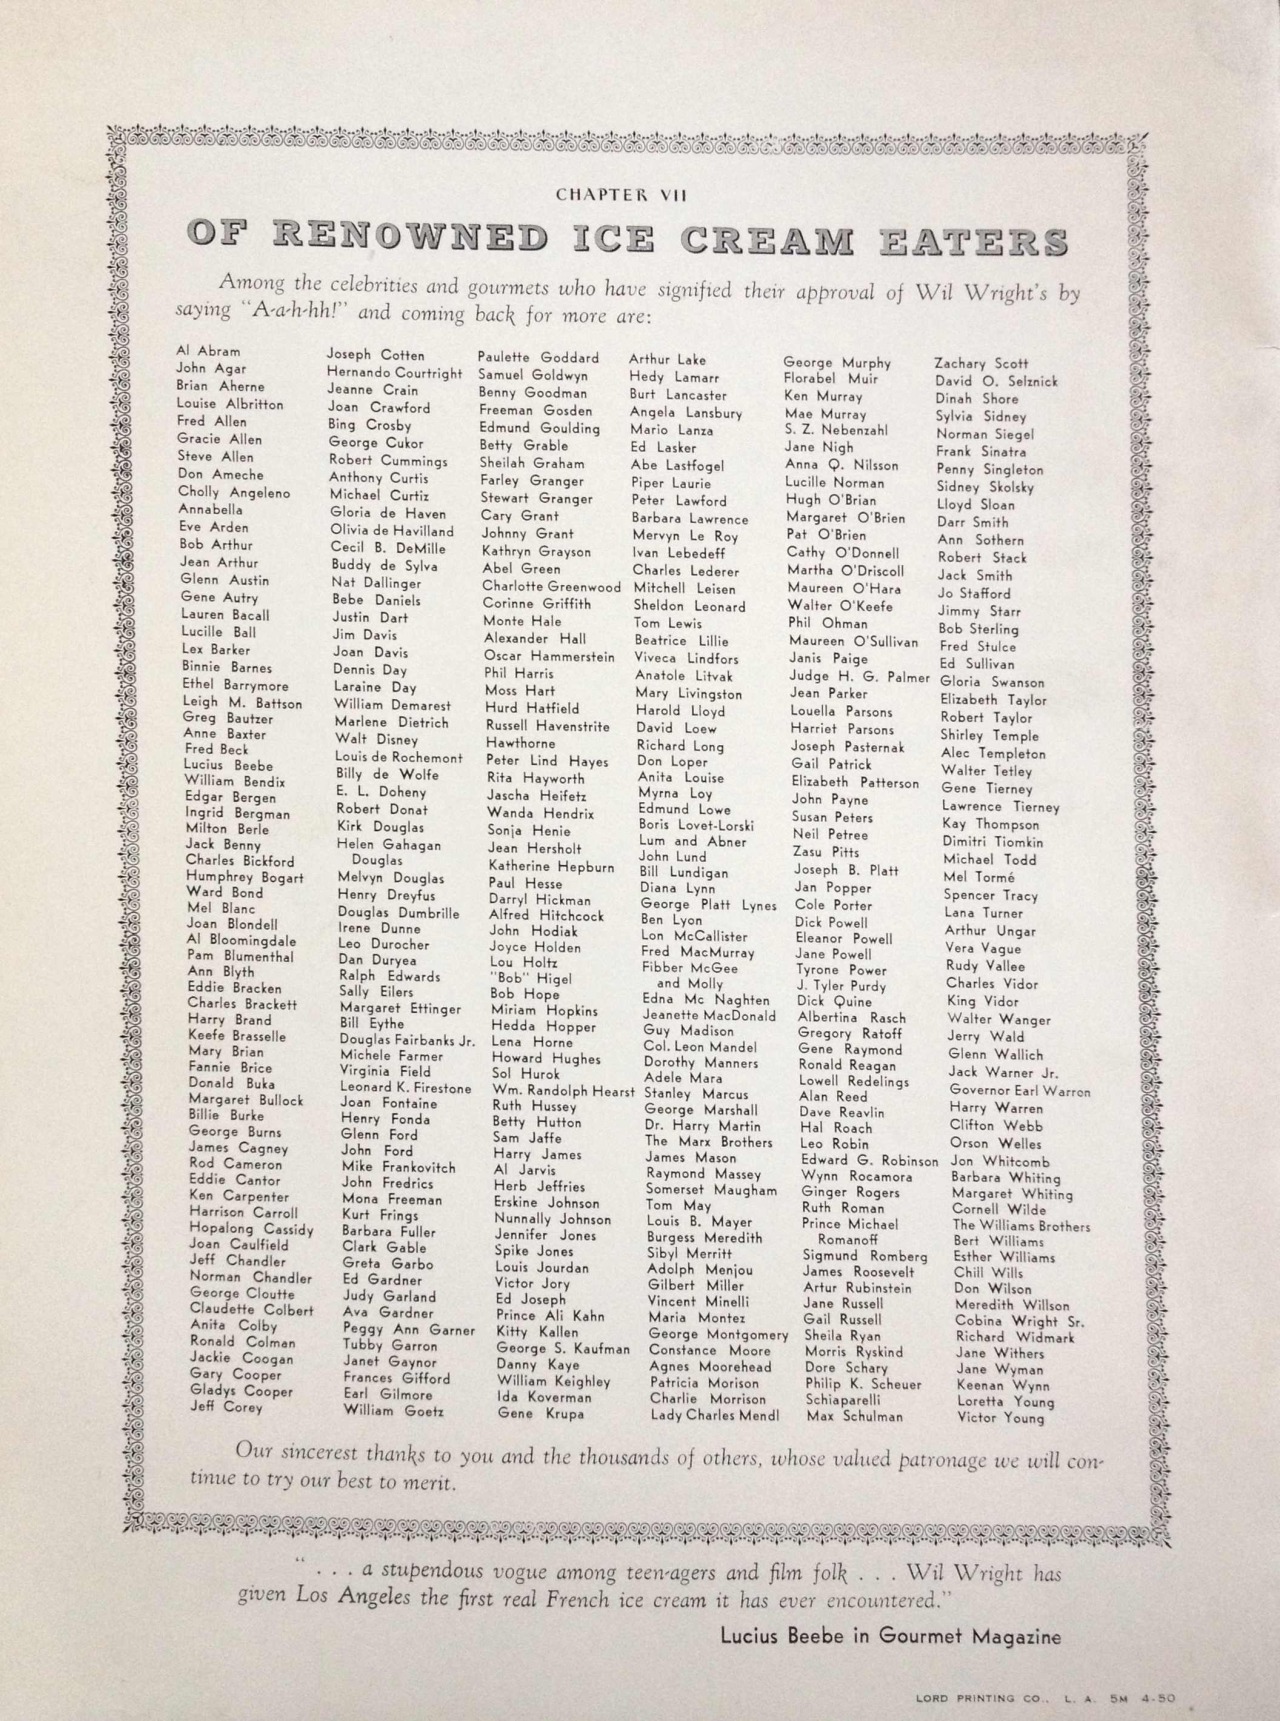 An only in L.A. menu. The back cover of Wil Wright’s ice cream shop menu was an honor roll of celebrity endorsements.